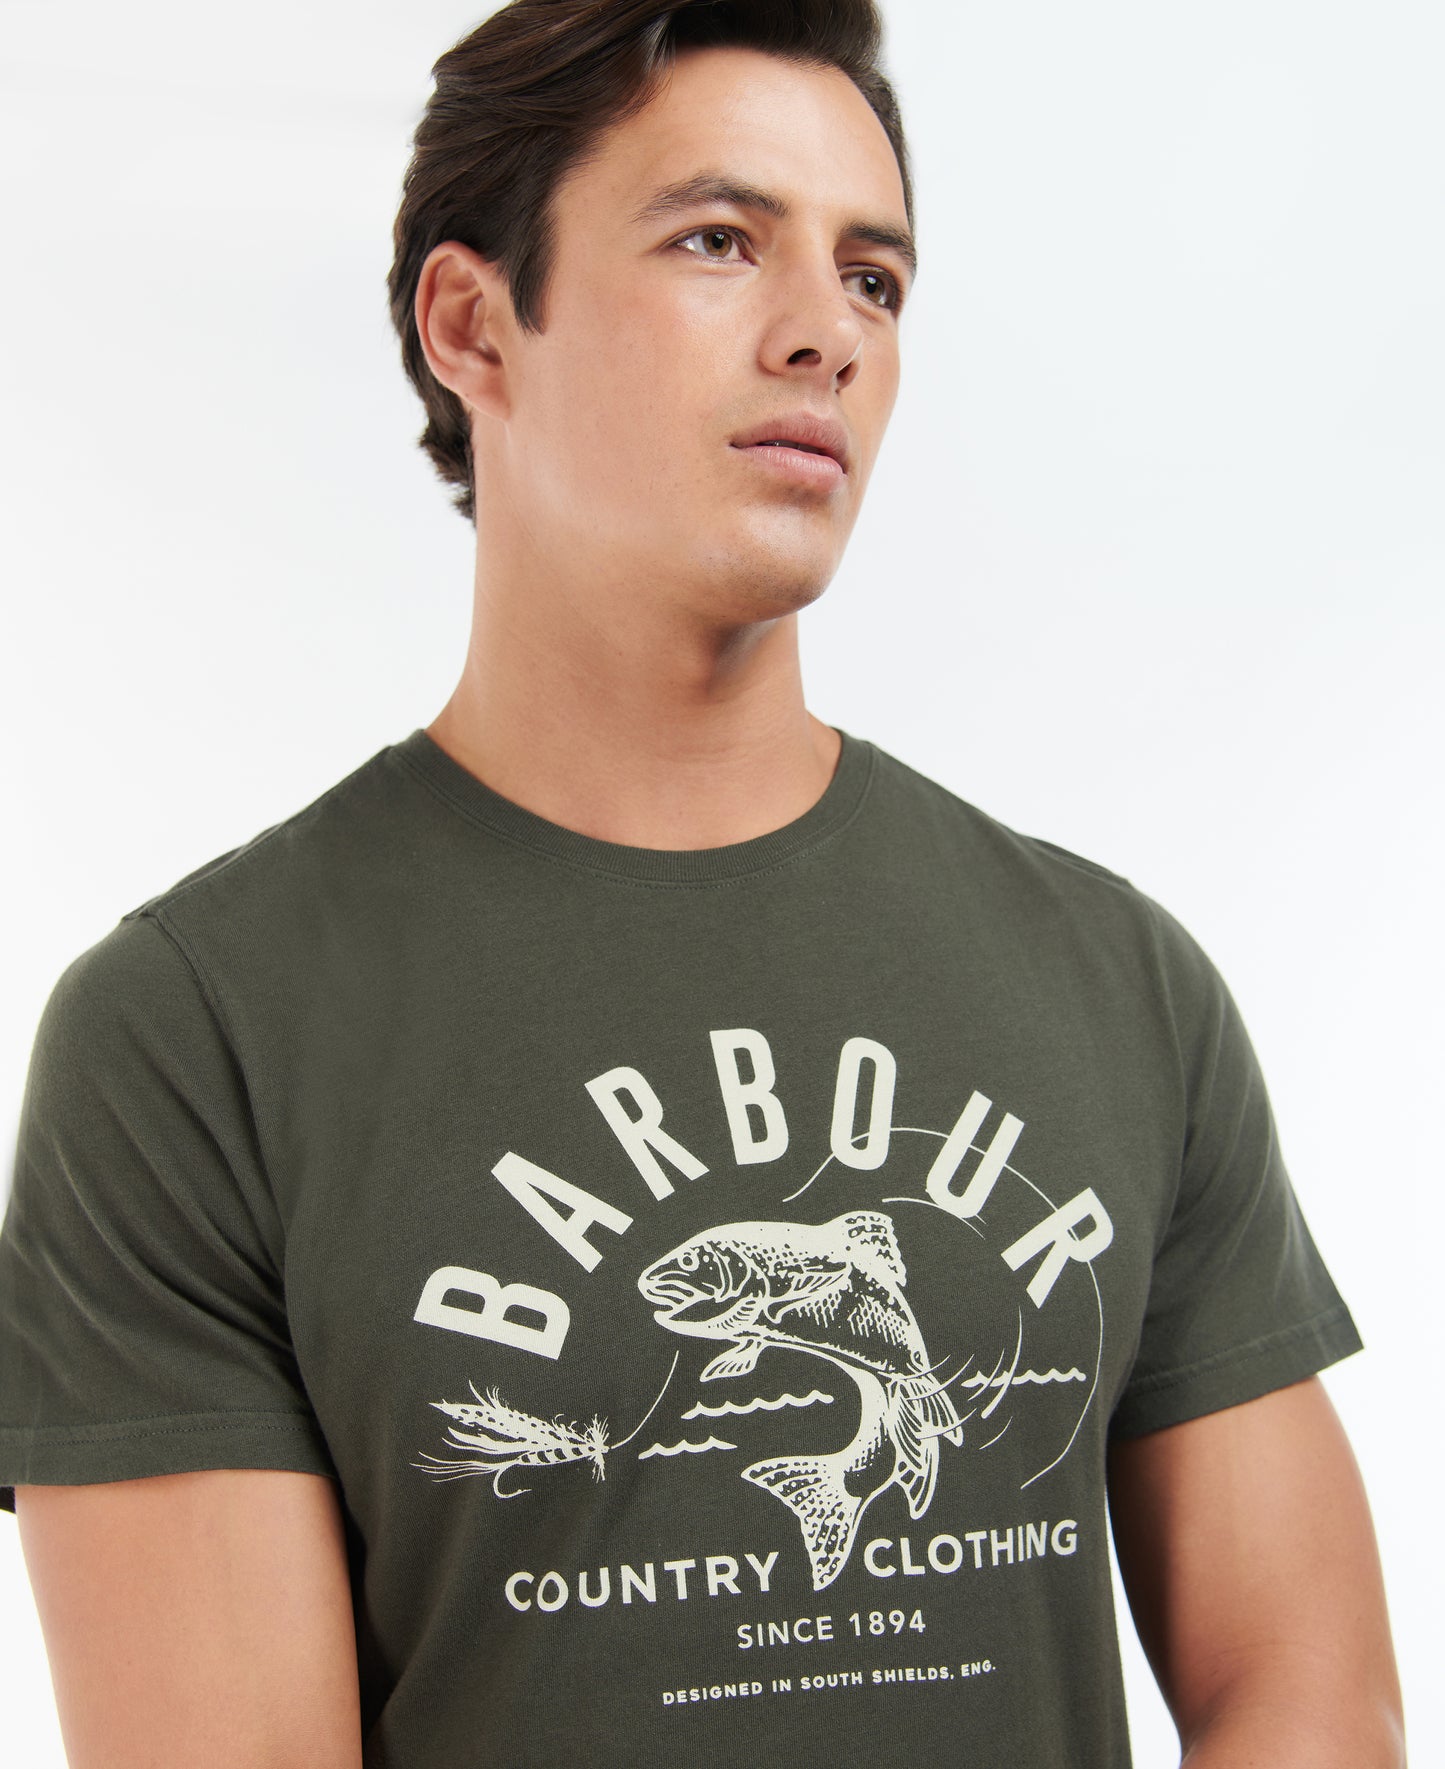 Barbour Country Clothing T-Shirt